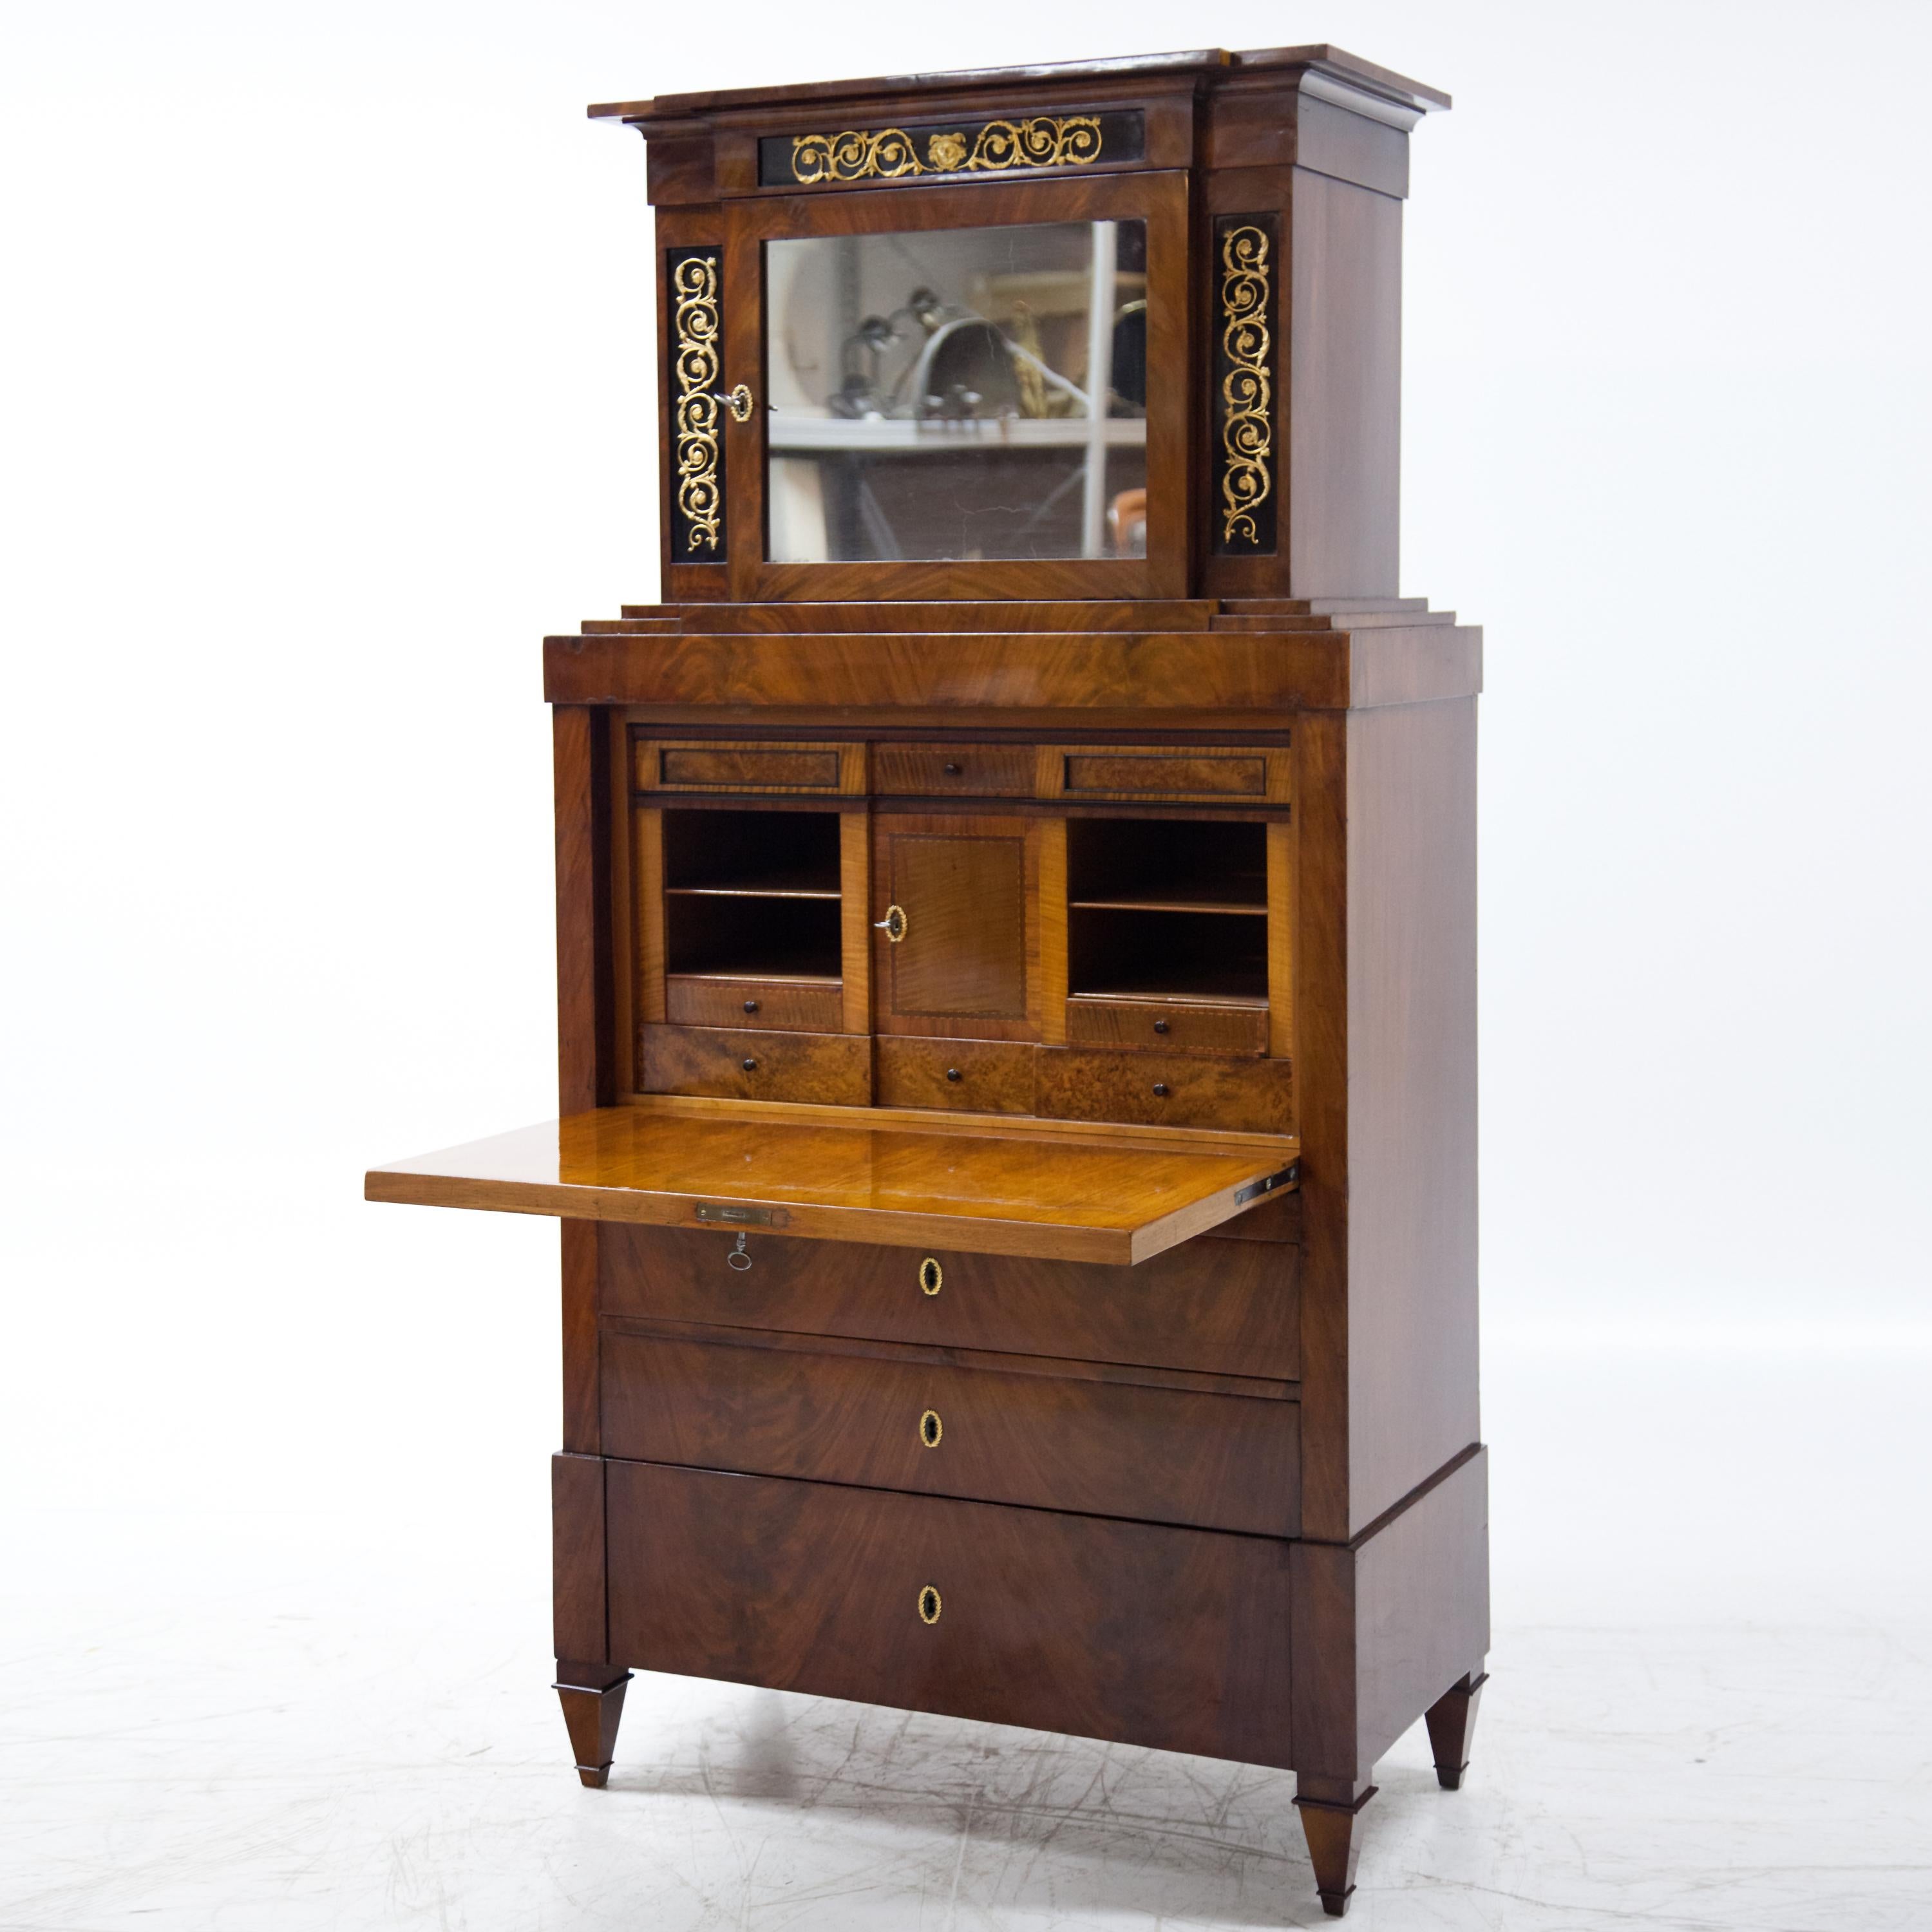 The secrétaire is standing on profiled square tapered feet with a three-drawered chests of drawers base, a writing flap and a one-door top cabinet over a stepped cornice, decorated with fire-gilded vine ornaments and central Hermes mascaron. Inside